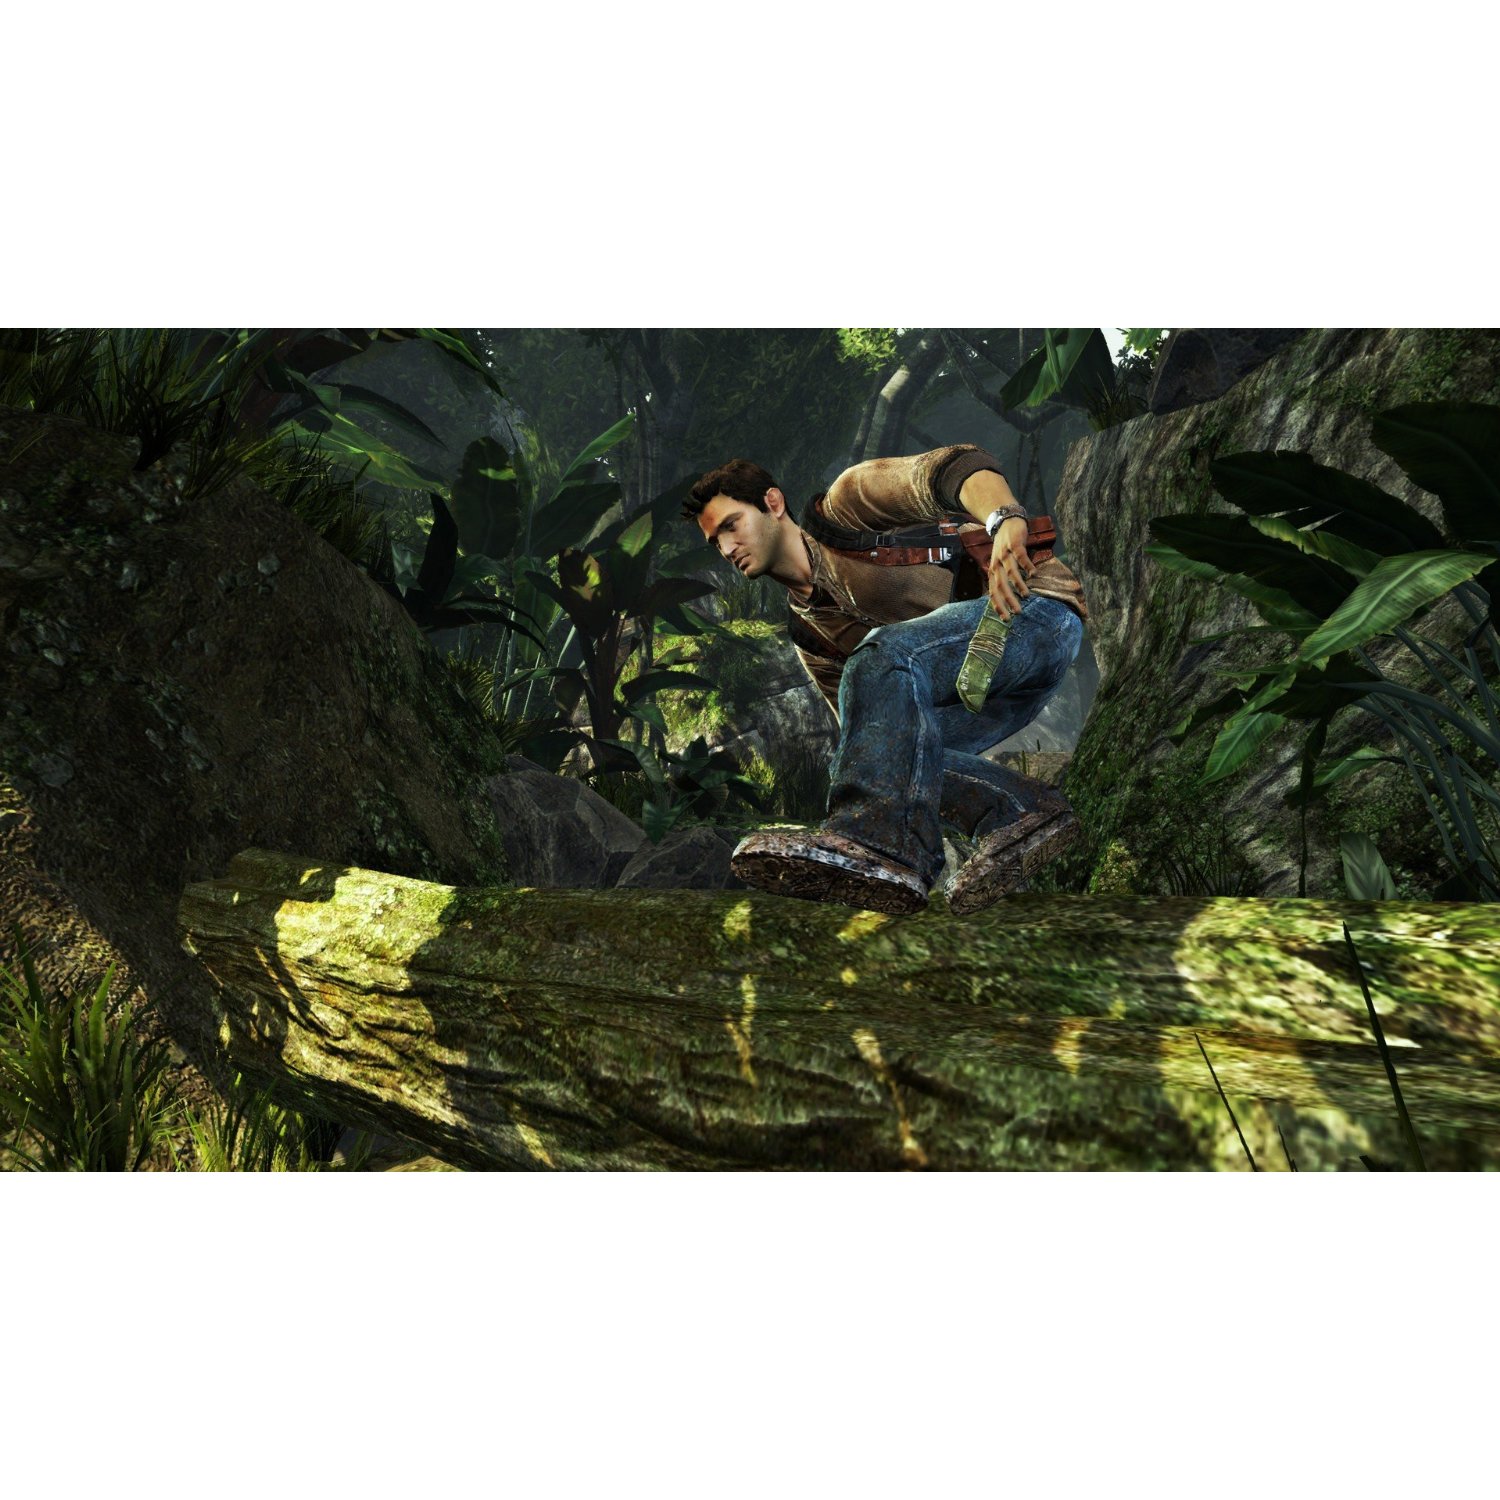 http://thetechjournal.com/wp-content/uploads/images/1112/1324125461-uncharted-golden-abyss-game-for-preorder-5.jpg